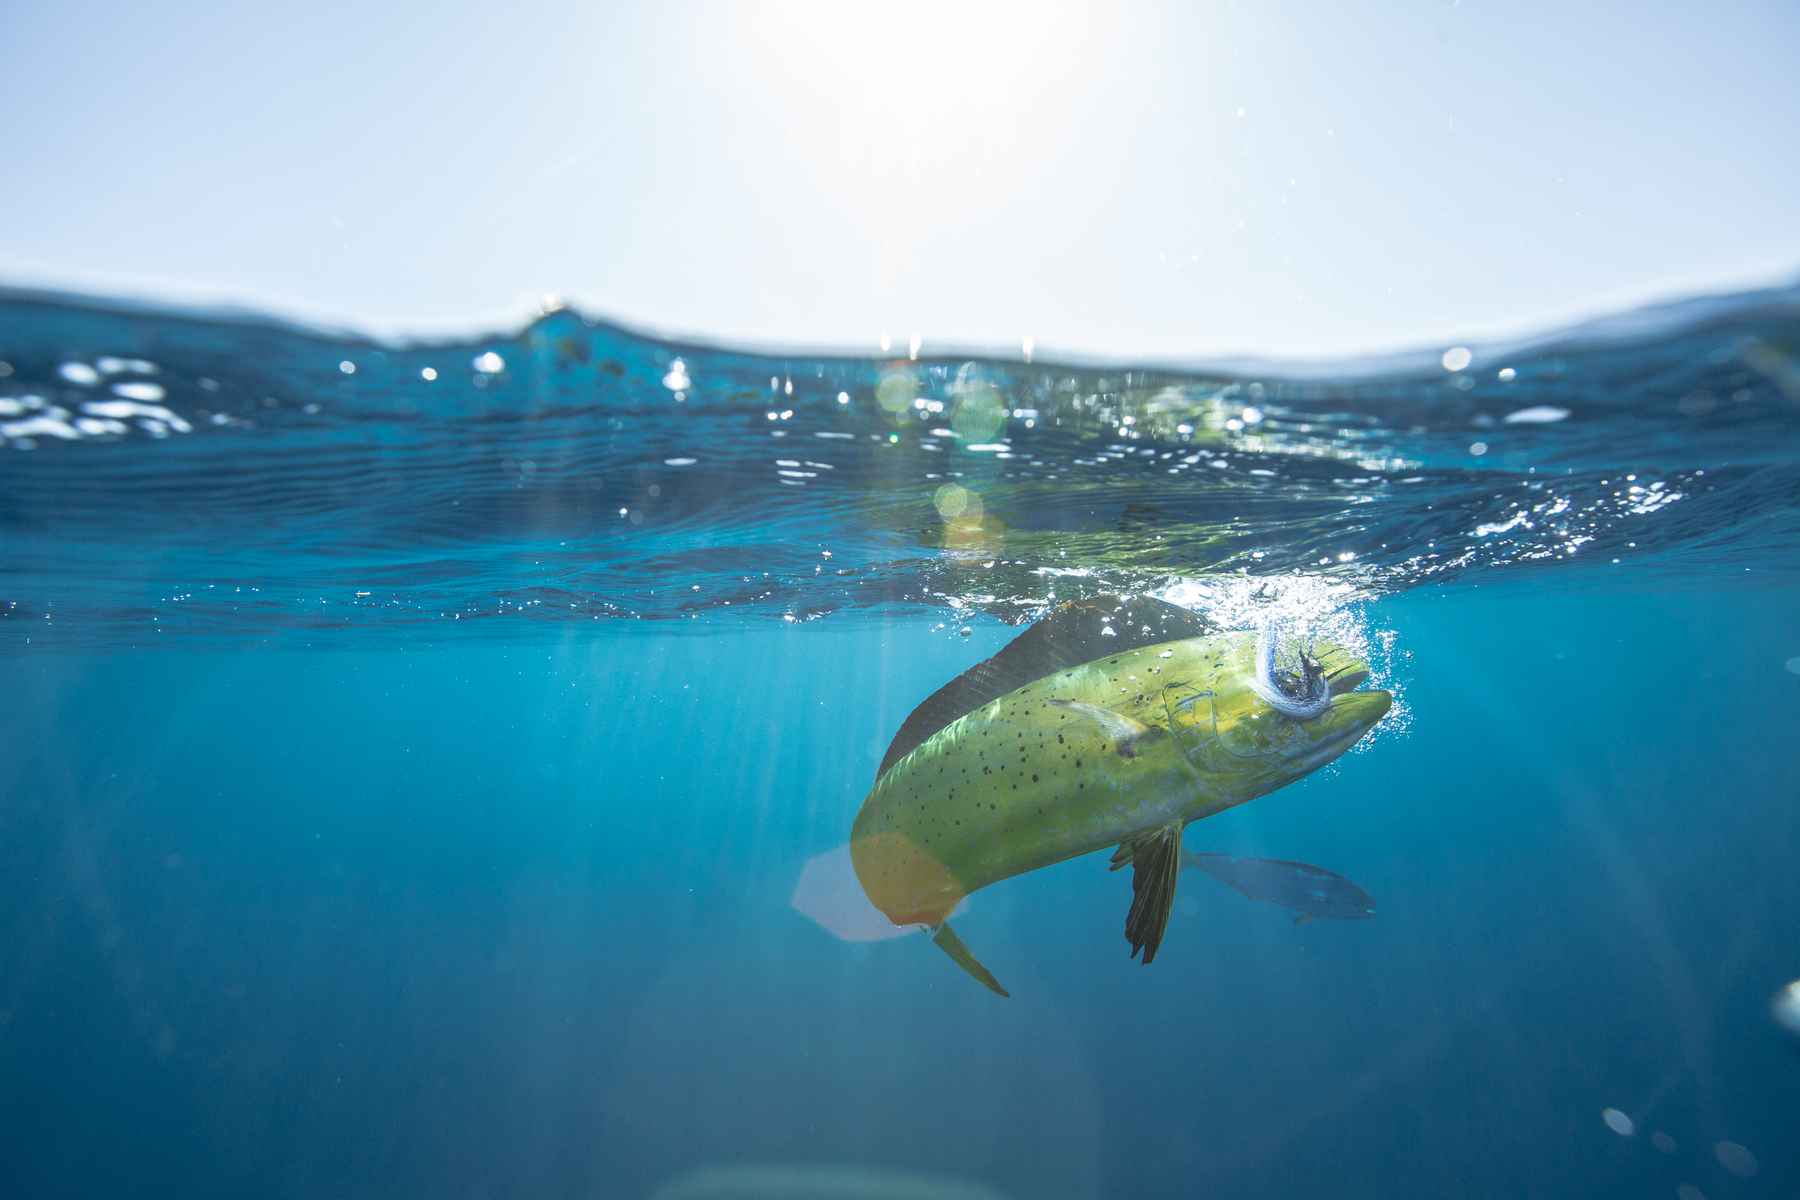 Underwater Fishing Photography: Tips for Success